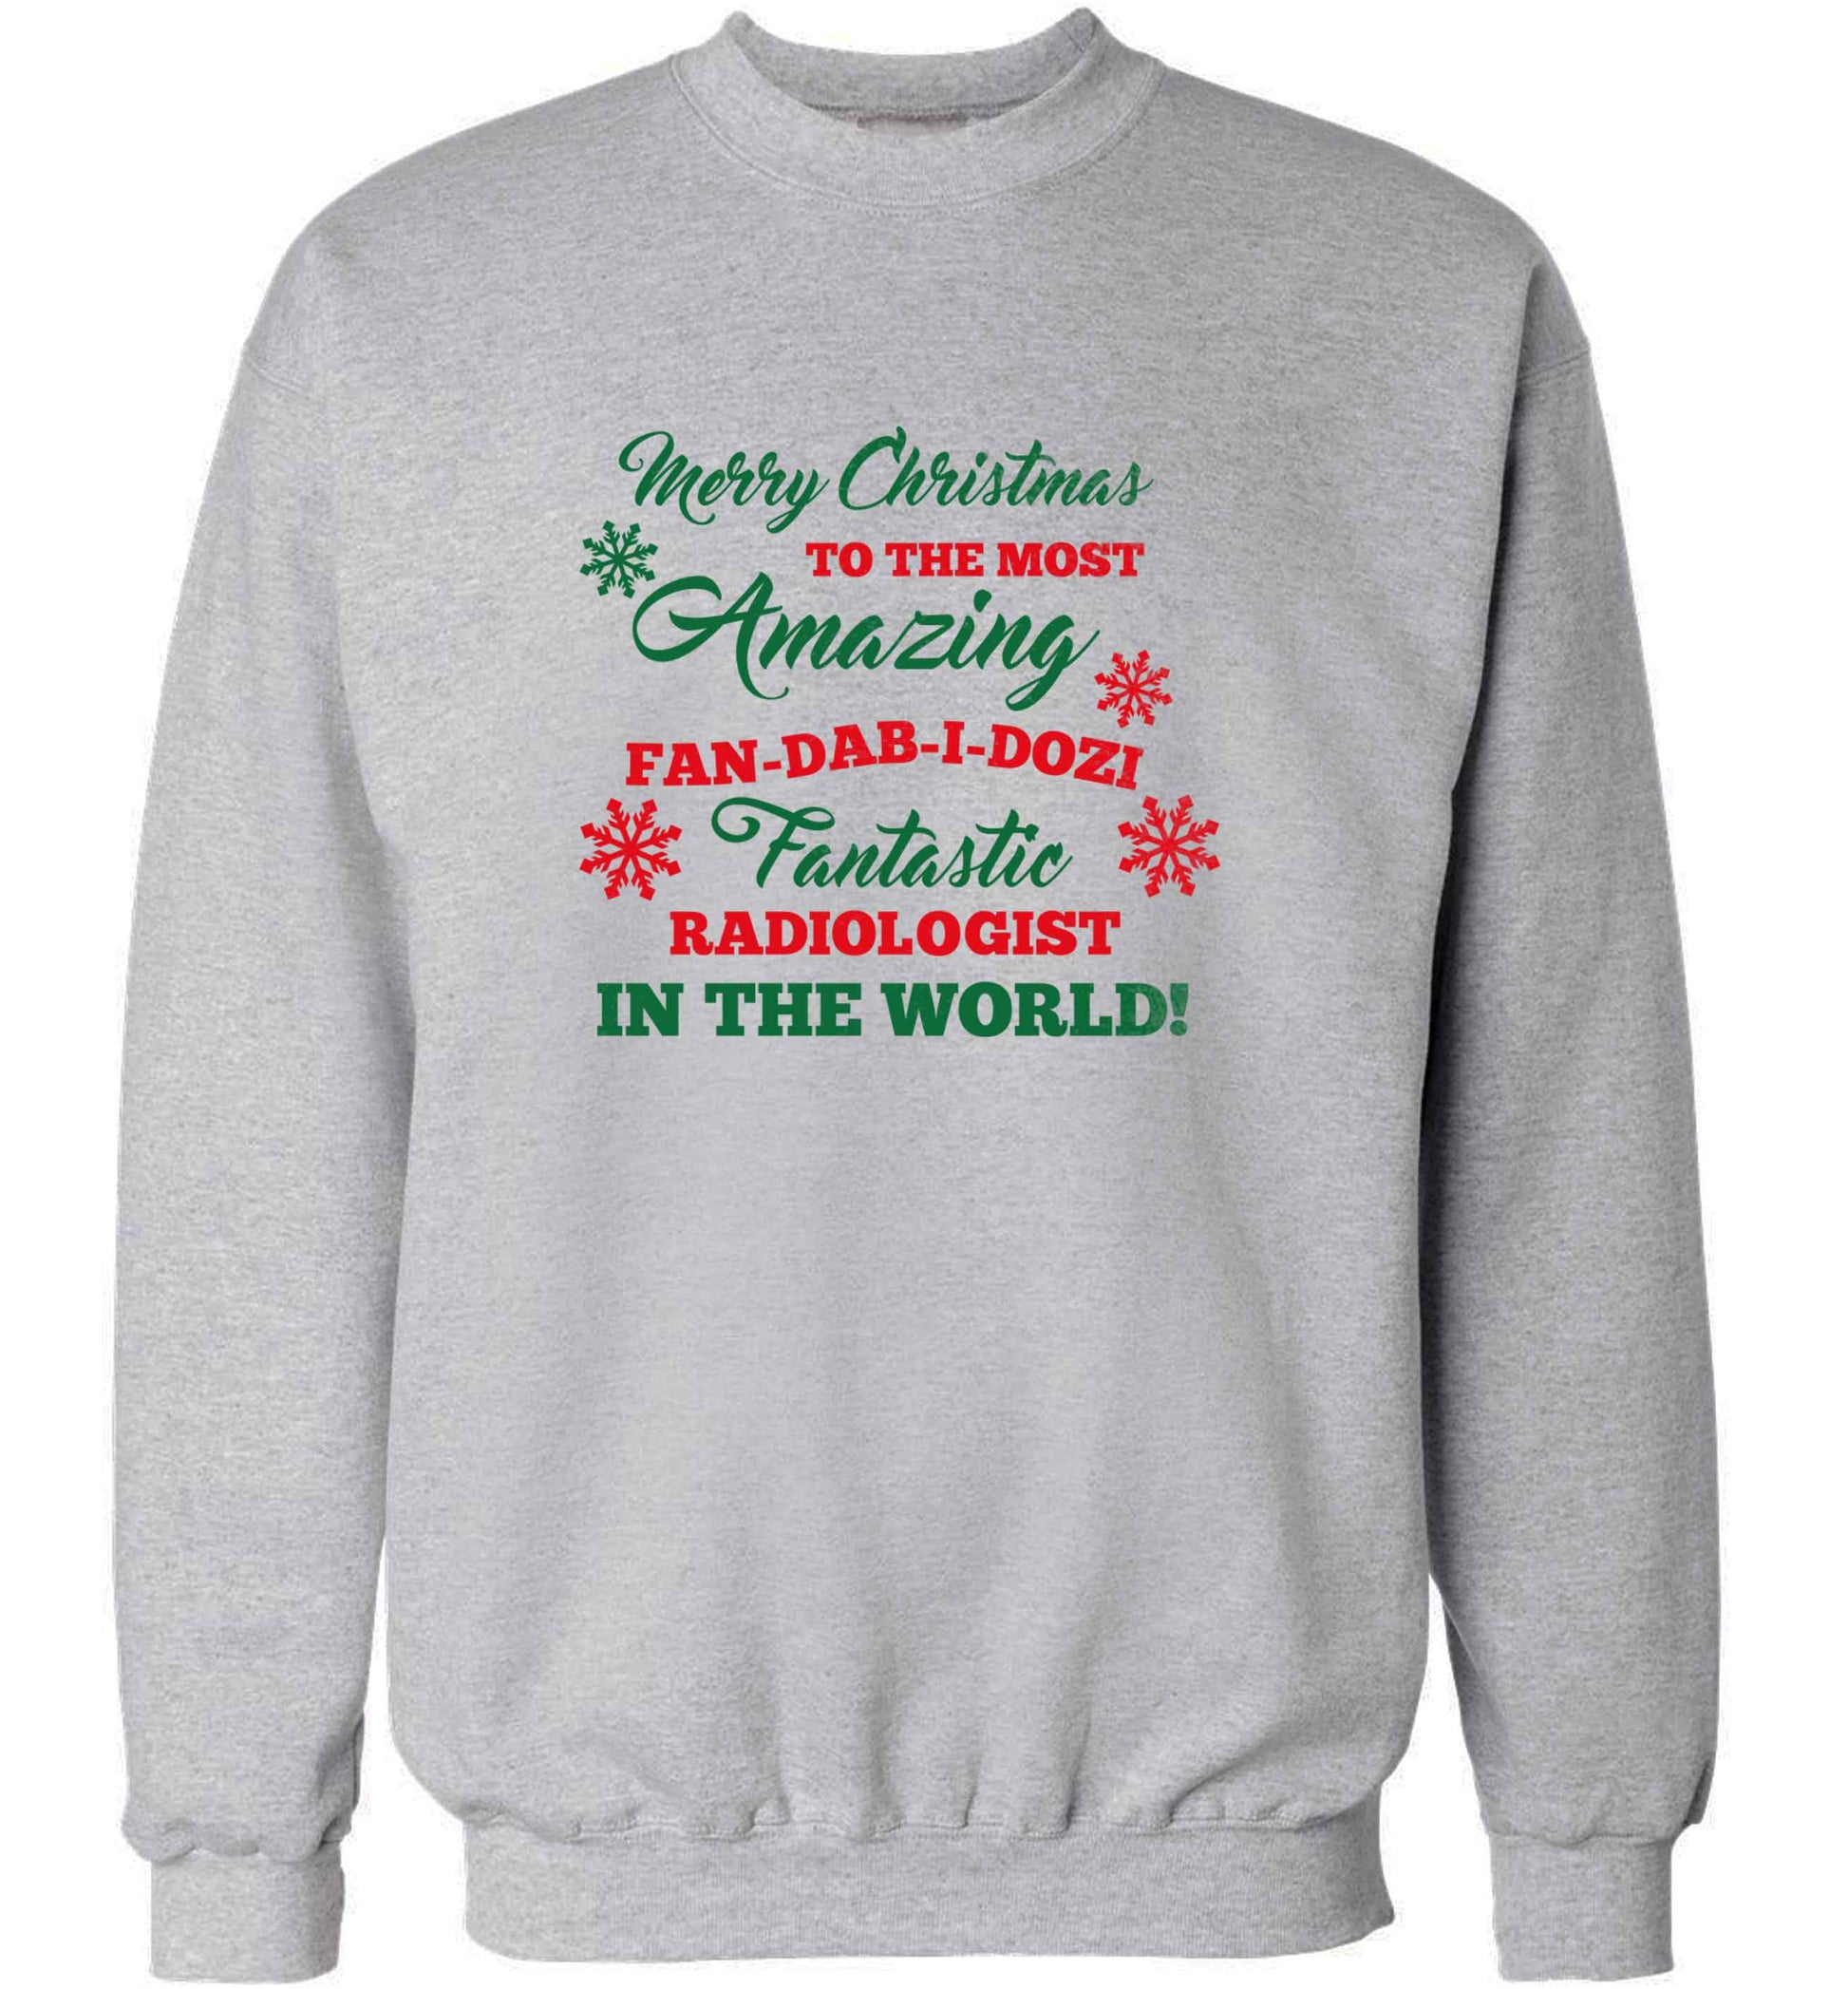 Merry Christmas to the most amazing radiologist in the world! adult's unisex grey sweater 2XL